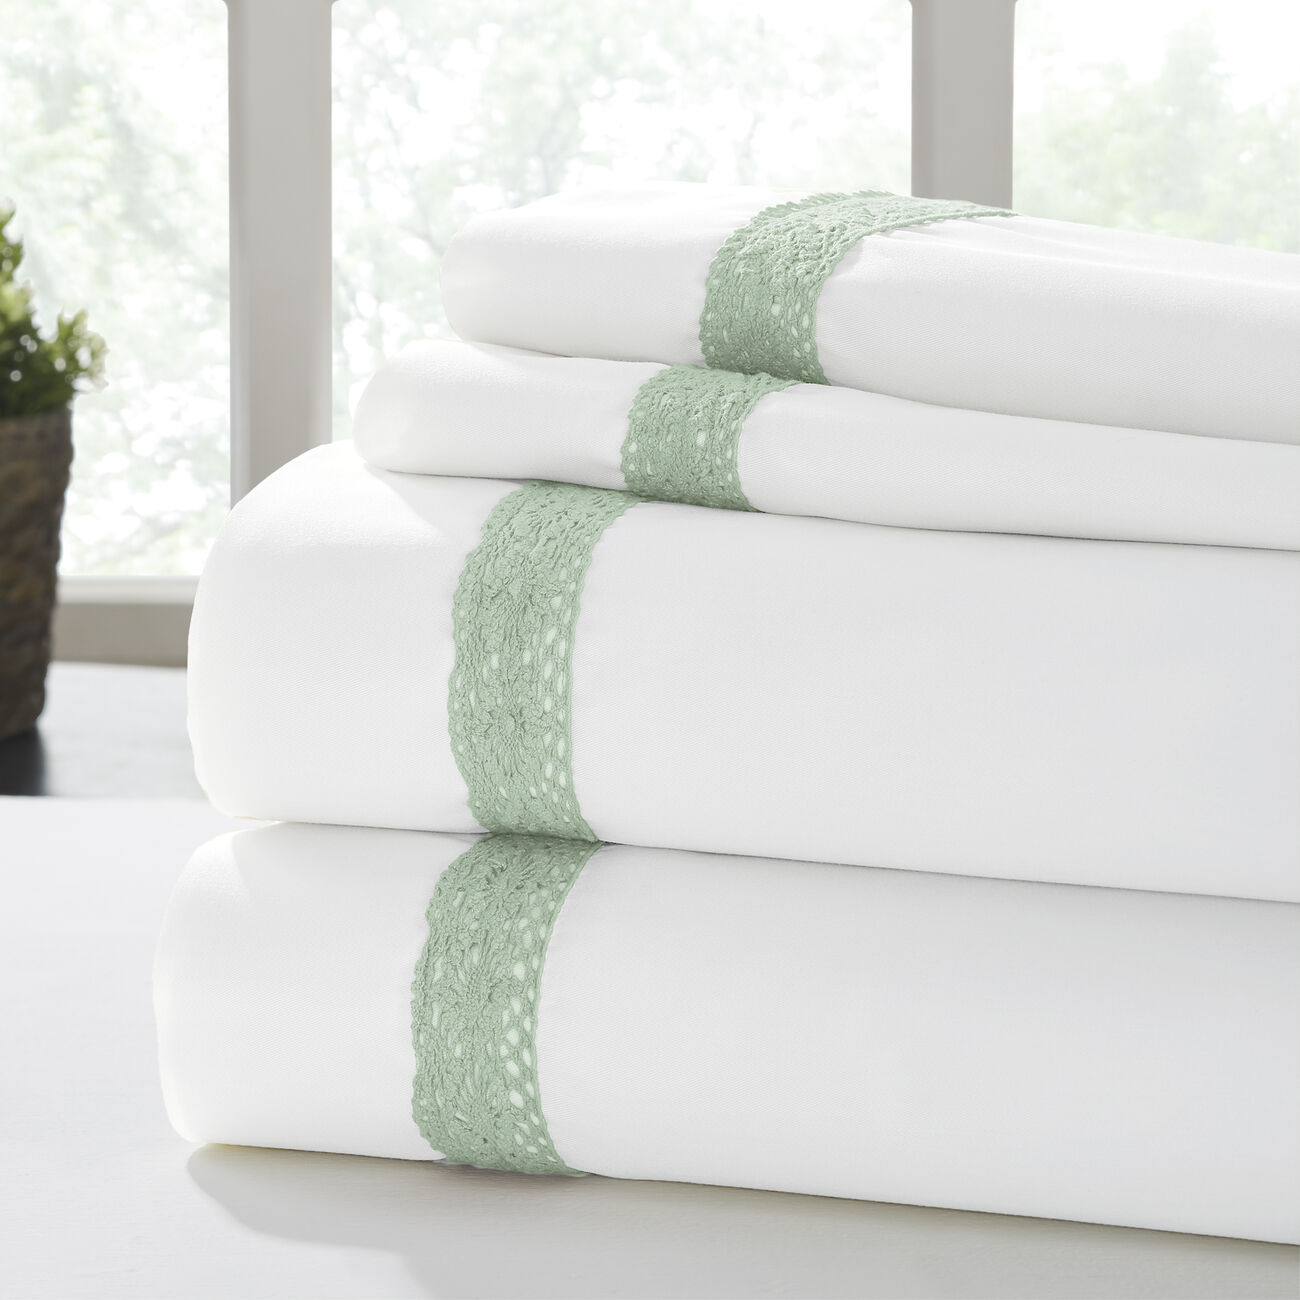 Pisa 4 Piece Sunshine Lace Hem Queen Size Sheet Set The Urban Port, White and Green